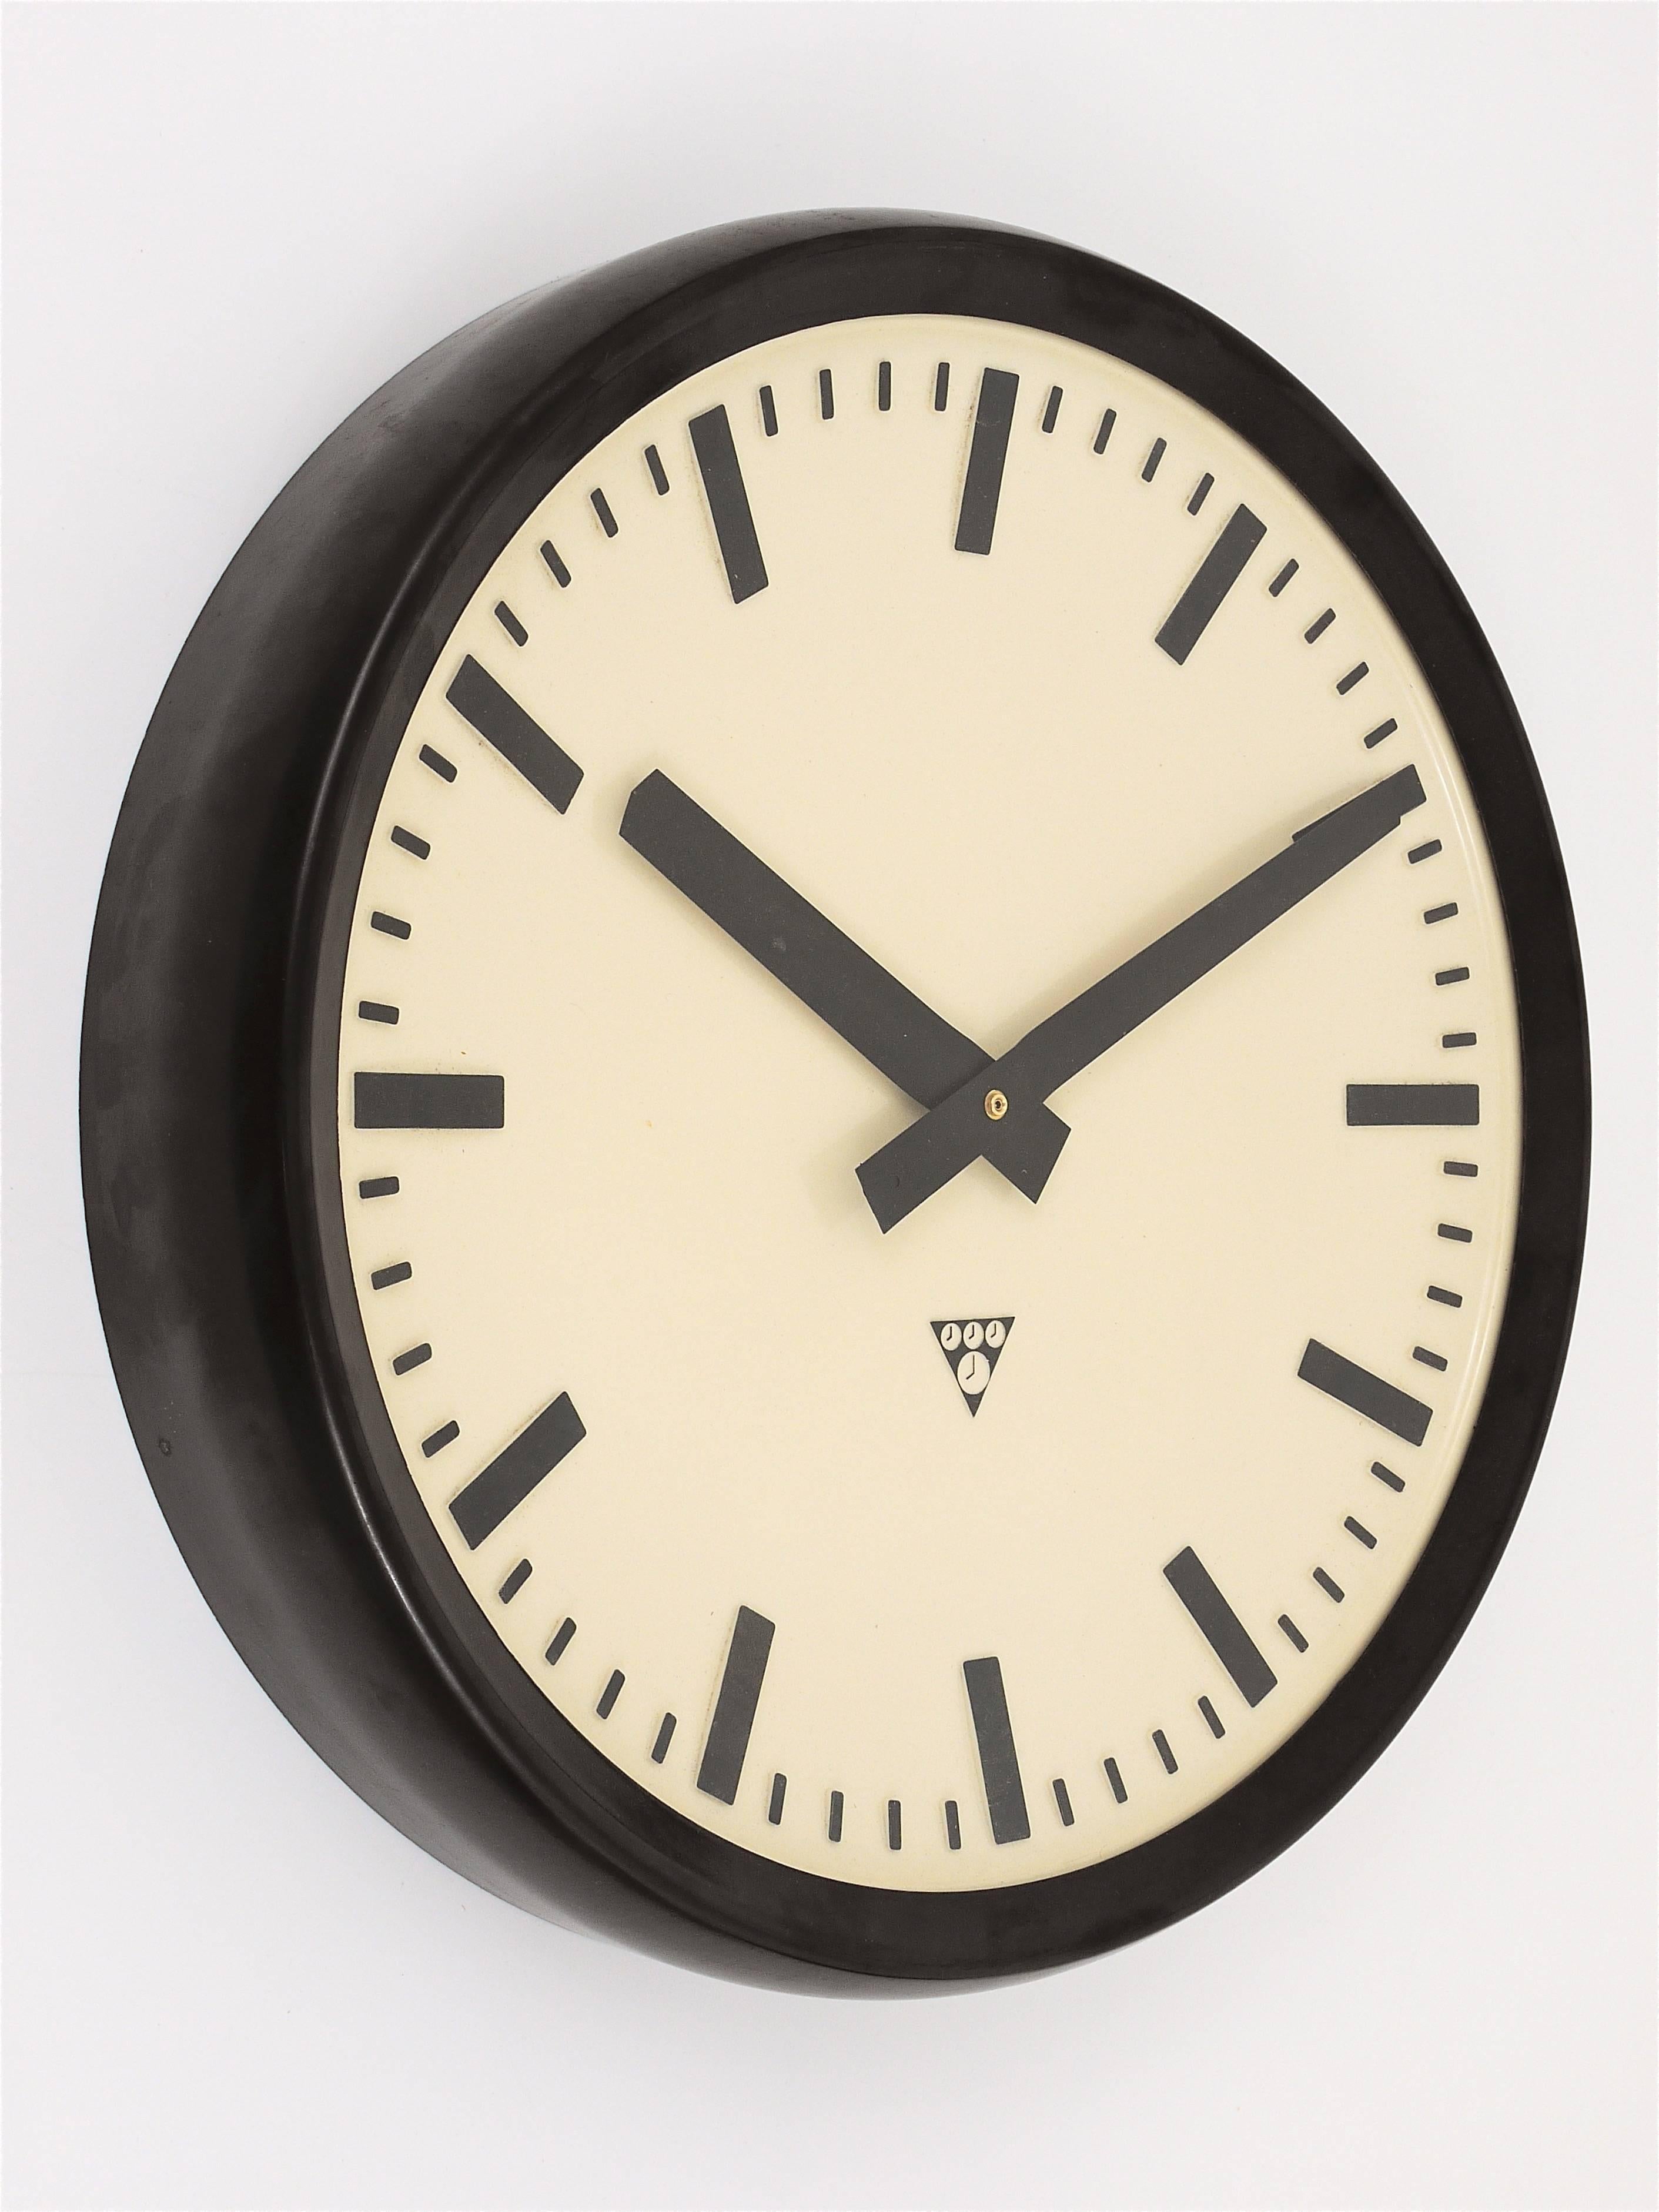 A very big loft or Industrial wall clock from the 1940s. Very straight but beautiful design, with a chic domed clocks face, the housing is made of dark brown and black bakelite. Measures: 19 inch diameter. Powered by a quartz movement, so it is